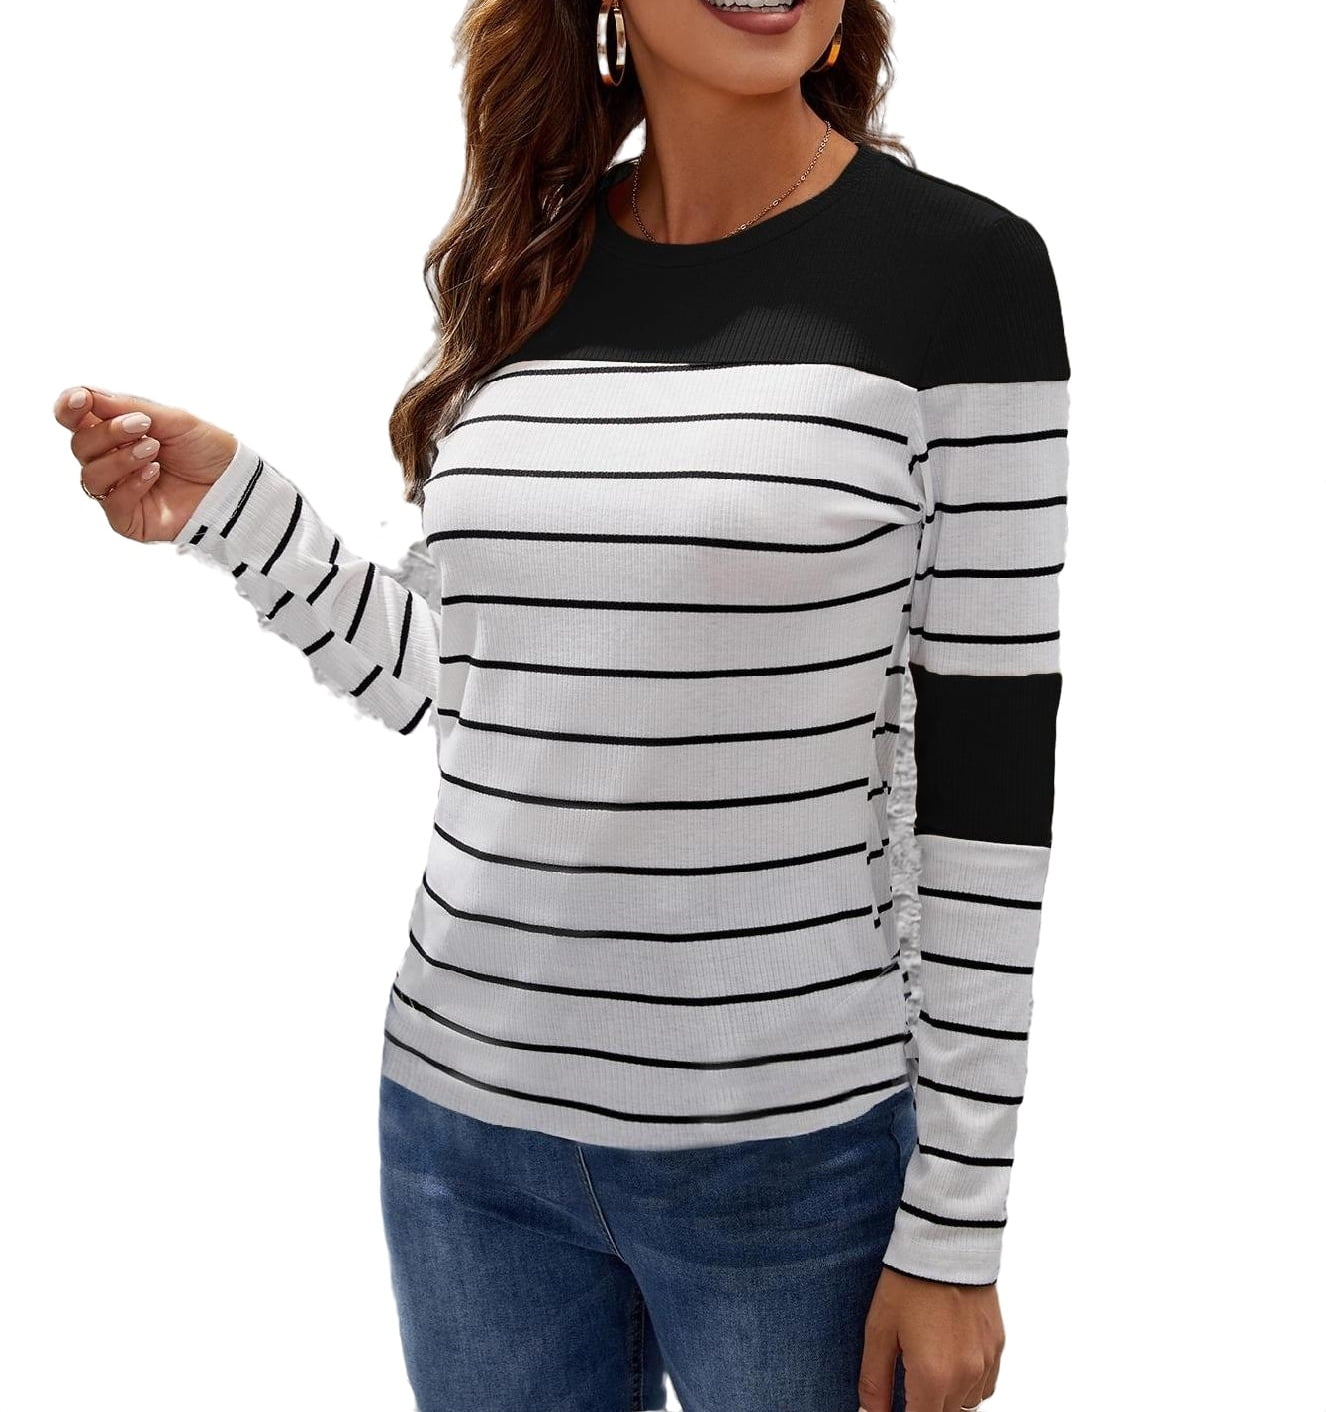 Casual Colorblock Round Neck Long and Black Women\'s ( Sleeve White T-Shirts Women\'s)